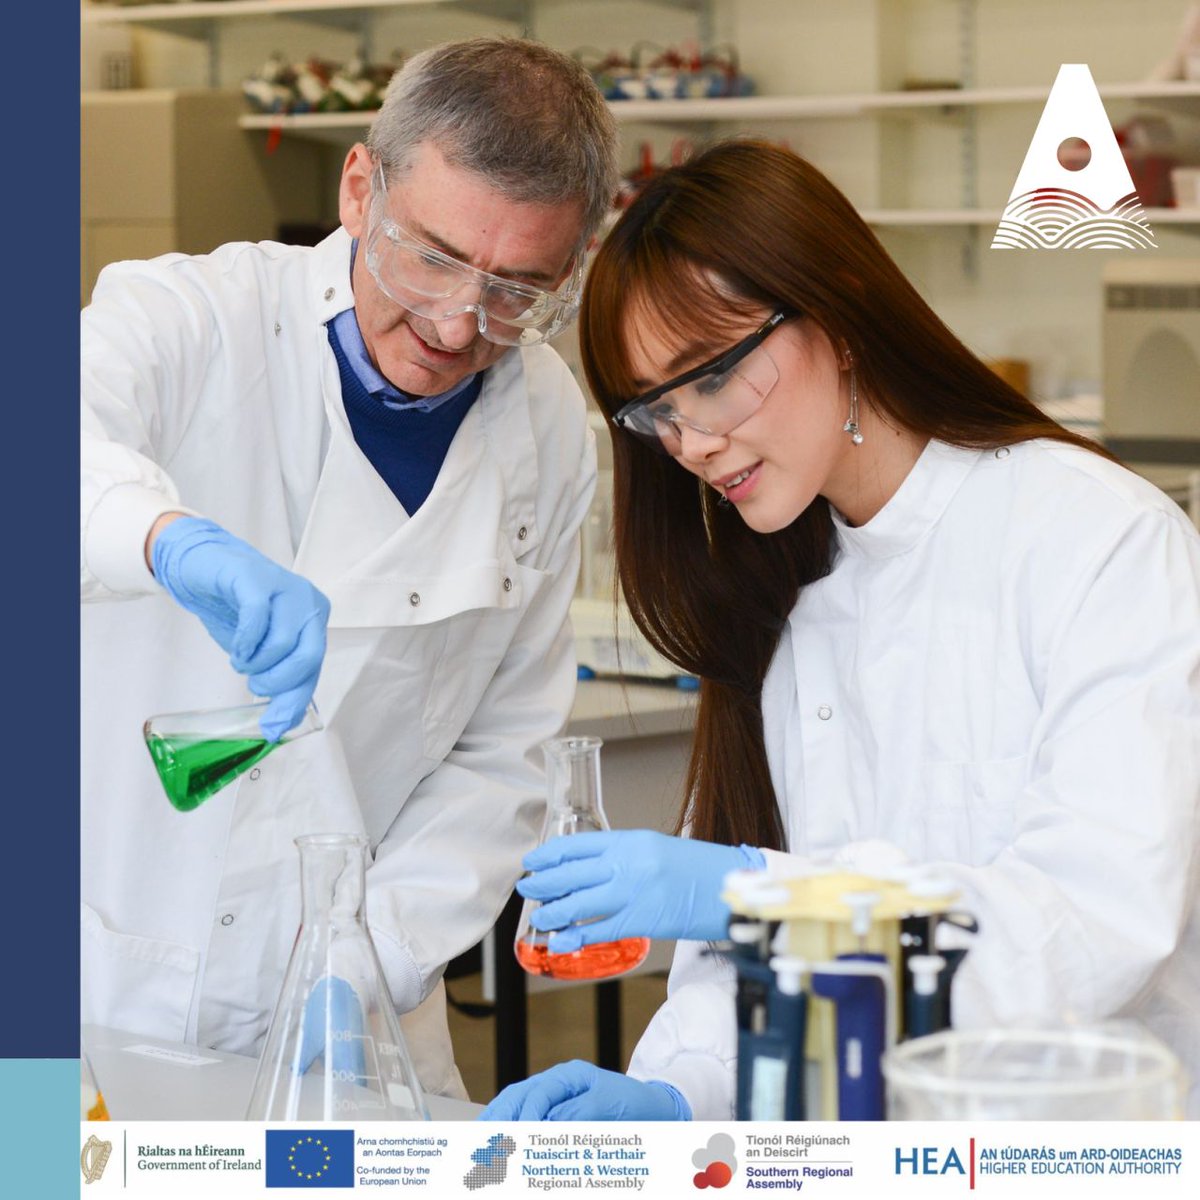 📣ATU announces 60 PhD scholarships under the Technological University Research and Innovation Supporting Enterprise (TU RISE) scheme which aims to builds research capacity between academia & regional enterprises in the west and northwest. ✍️ atu.ie/news/atu-annou… #AtlanticTU